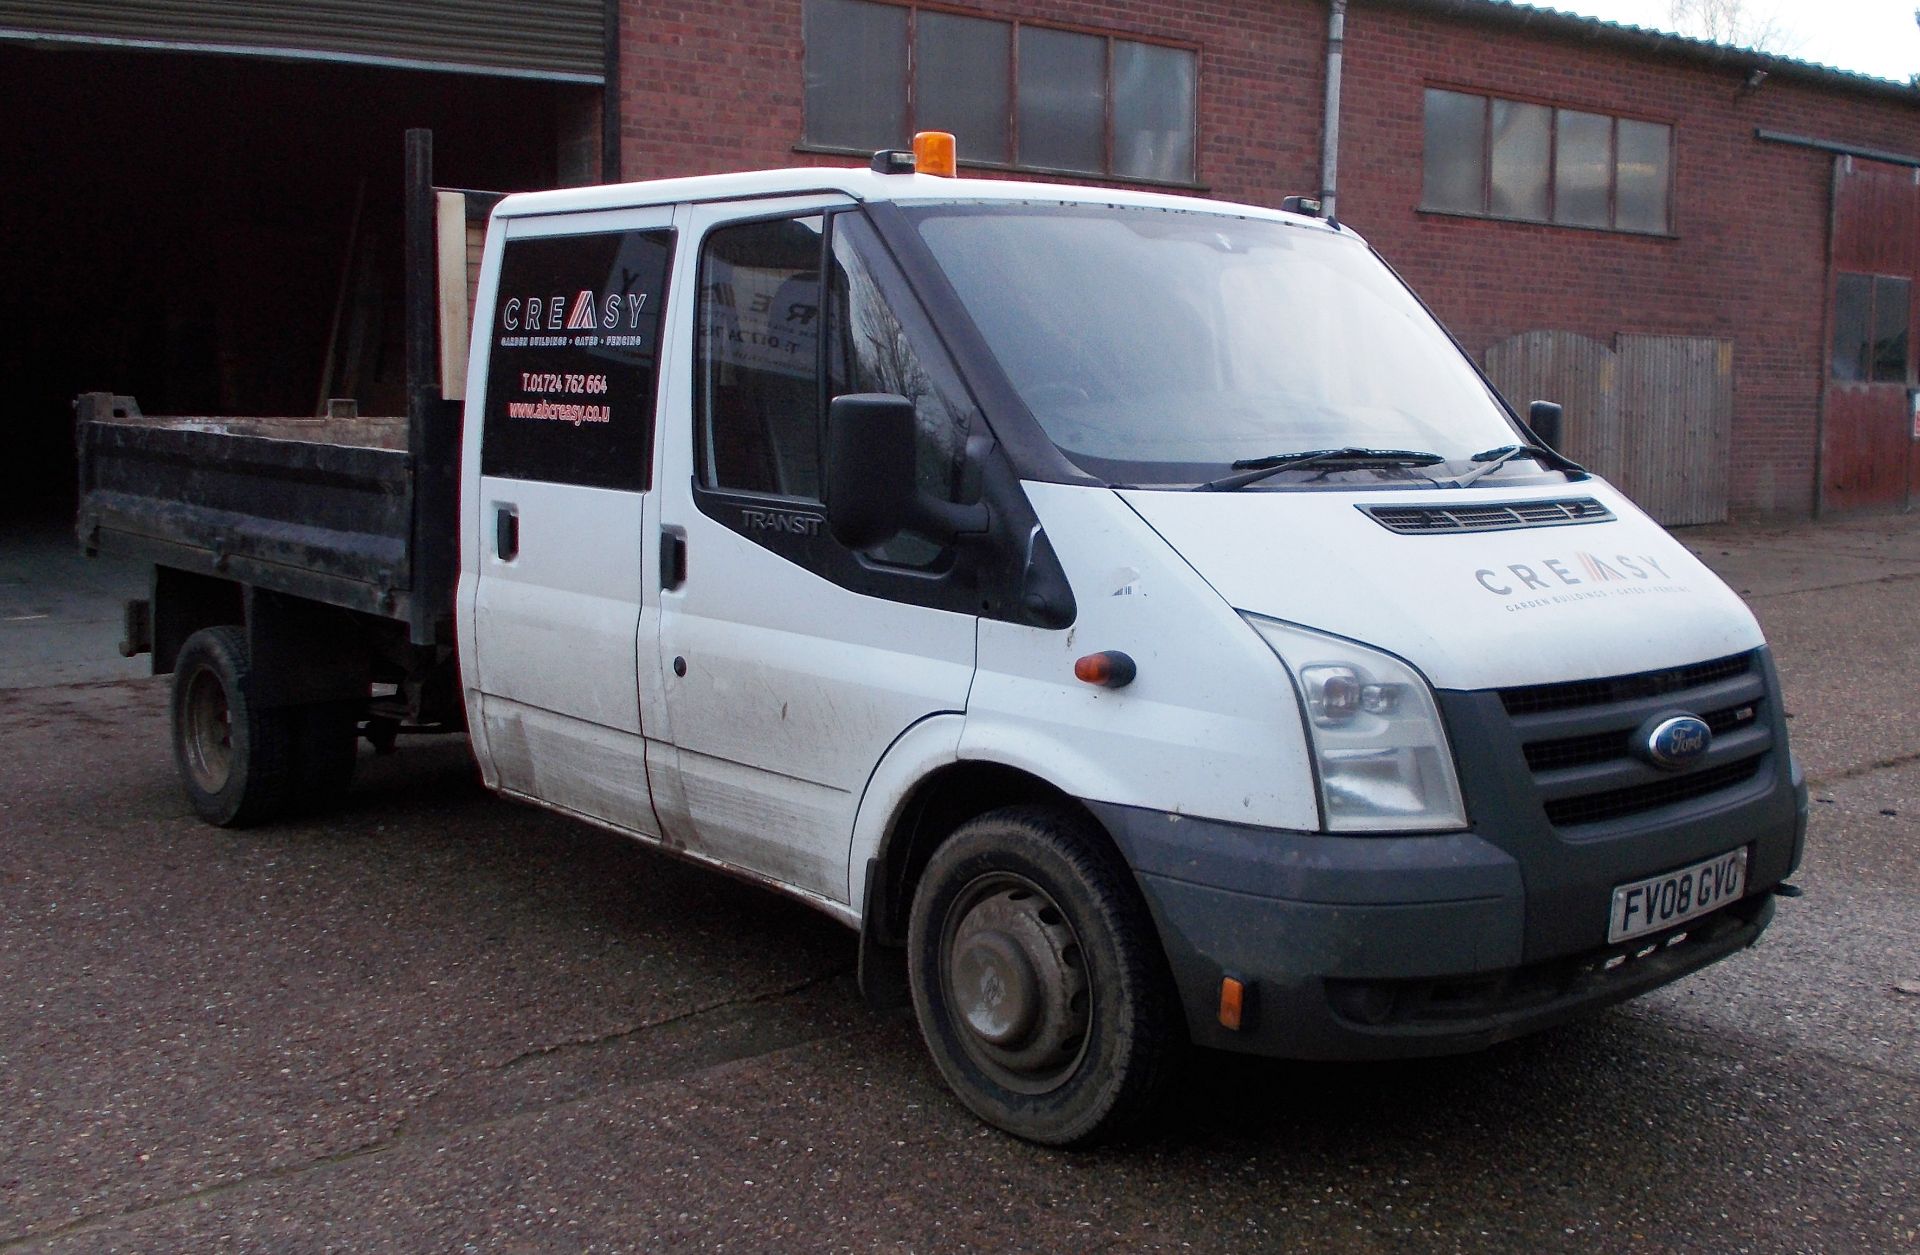 Ford Transit 350 Double Cab Tipper, Registration FV08 GVO, odometer reading at time of catalogue